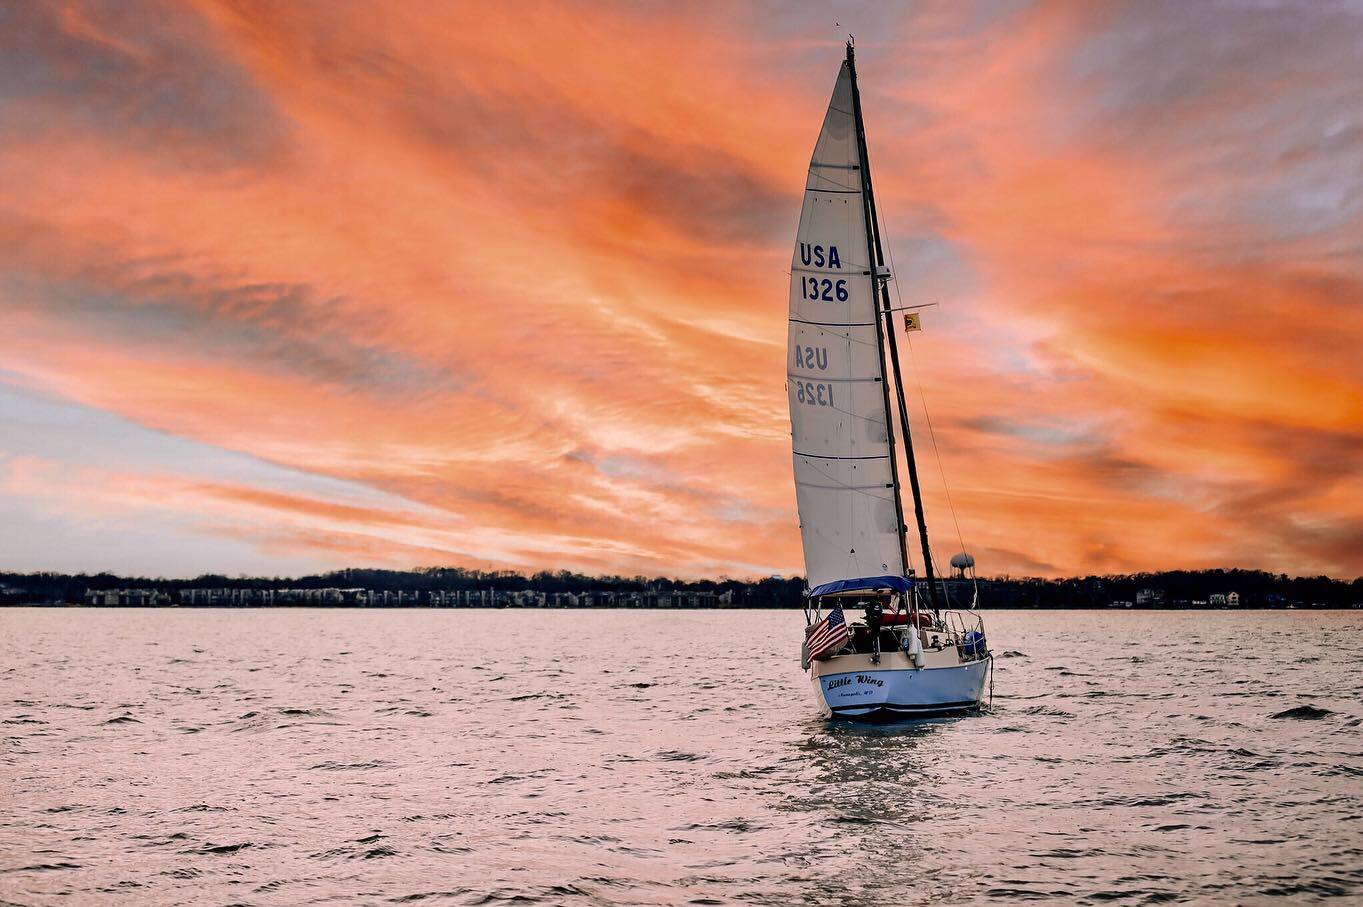 Kelsey Bonham '22 and her boat, Little Wing, in the sunset.